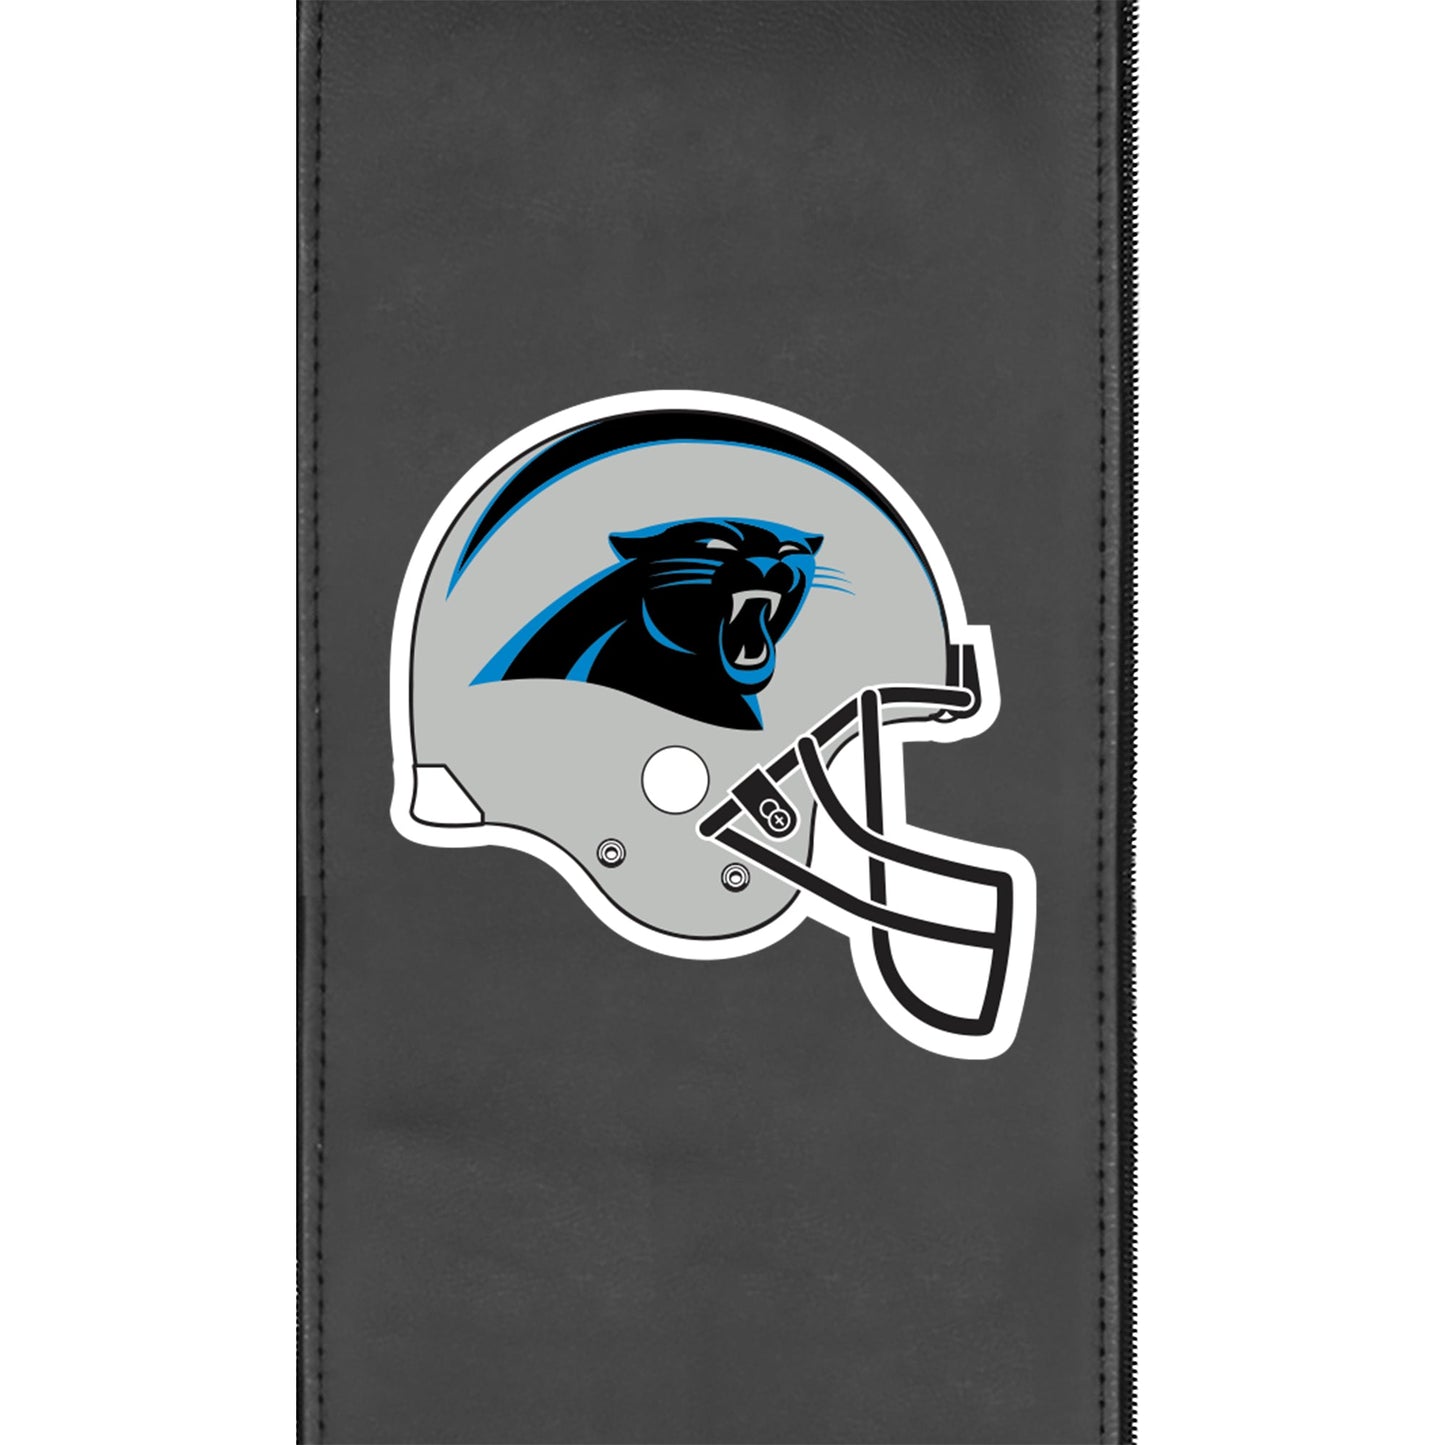 Stealth Power Plus Recliner with Carolina Panthers Helmet Logo